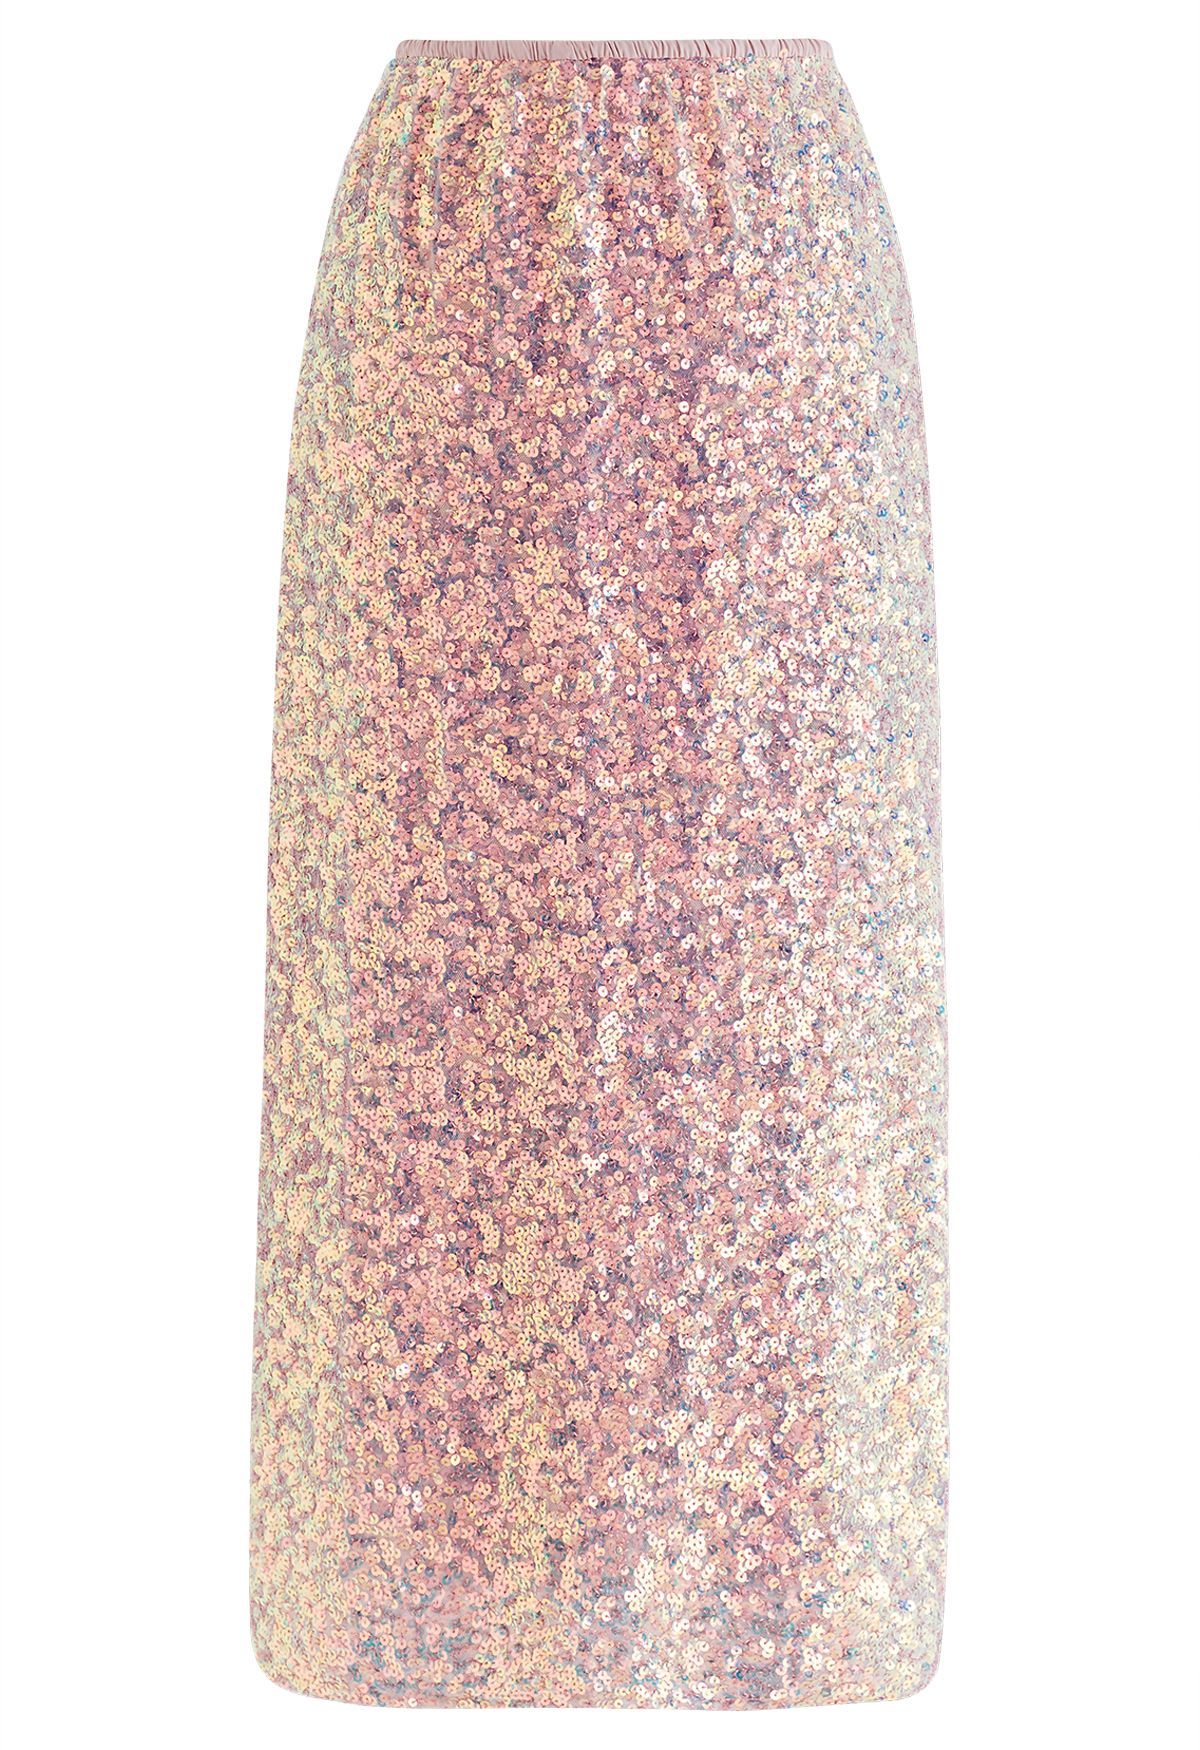 Iridescent Sequin Embellished Pencil Skirt in Pink | Chicwish